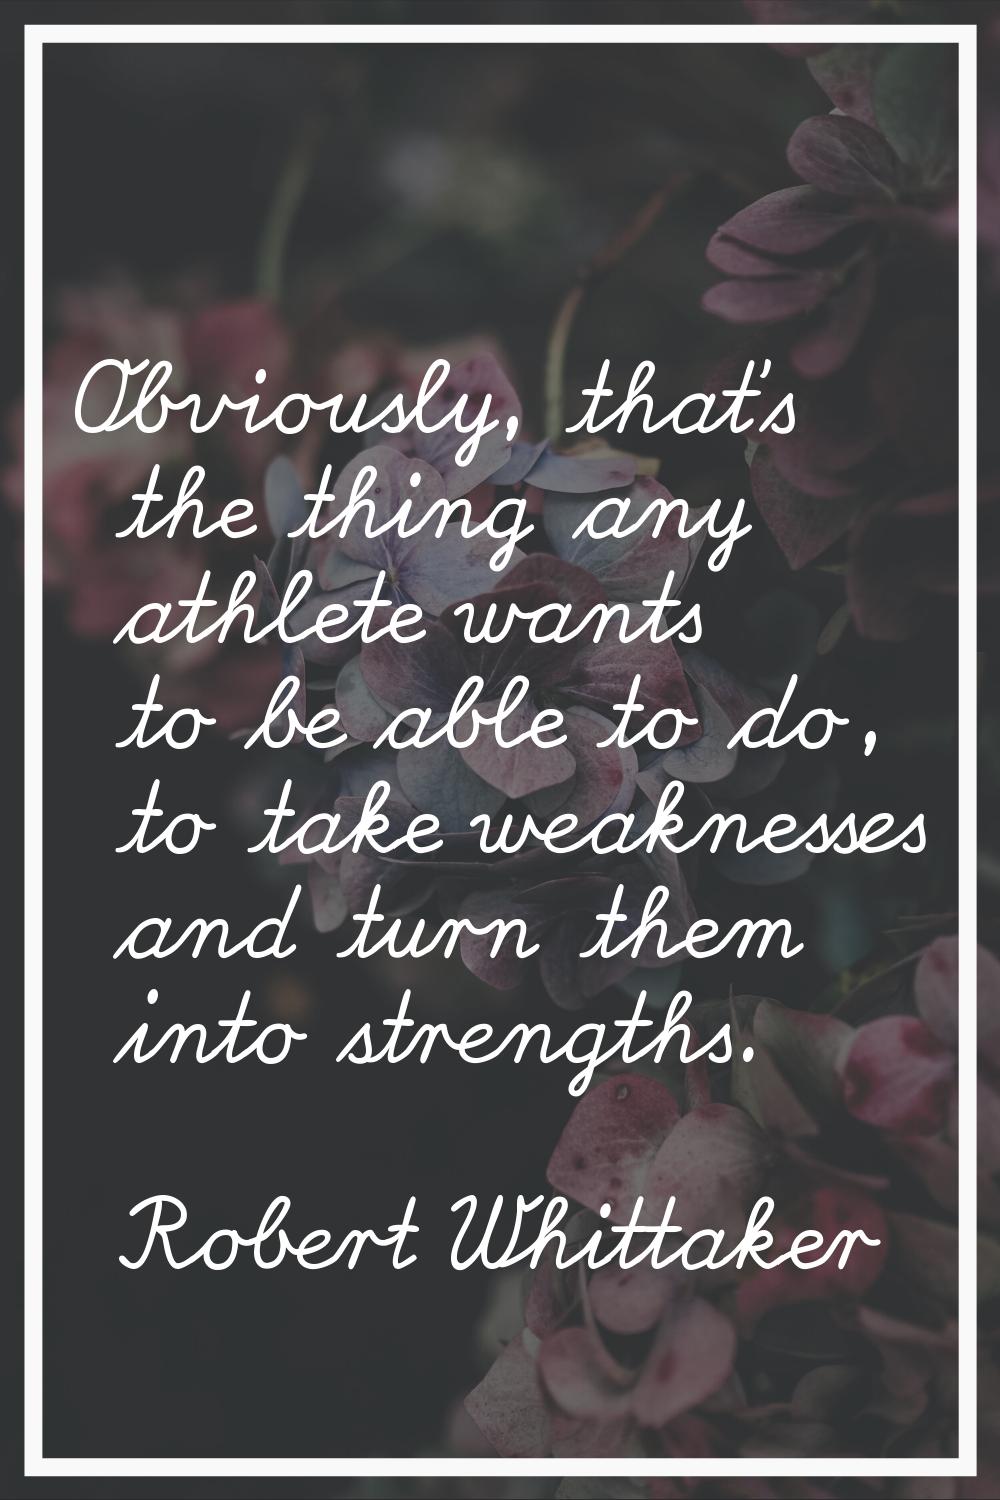 Obviously, that's the thing any athlete wants to be able to do, to take weaknesses and turn them in